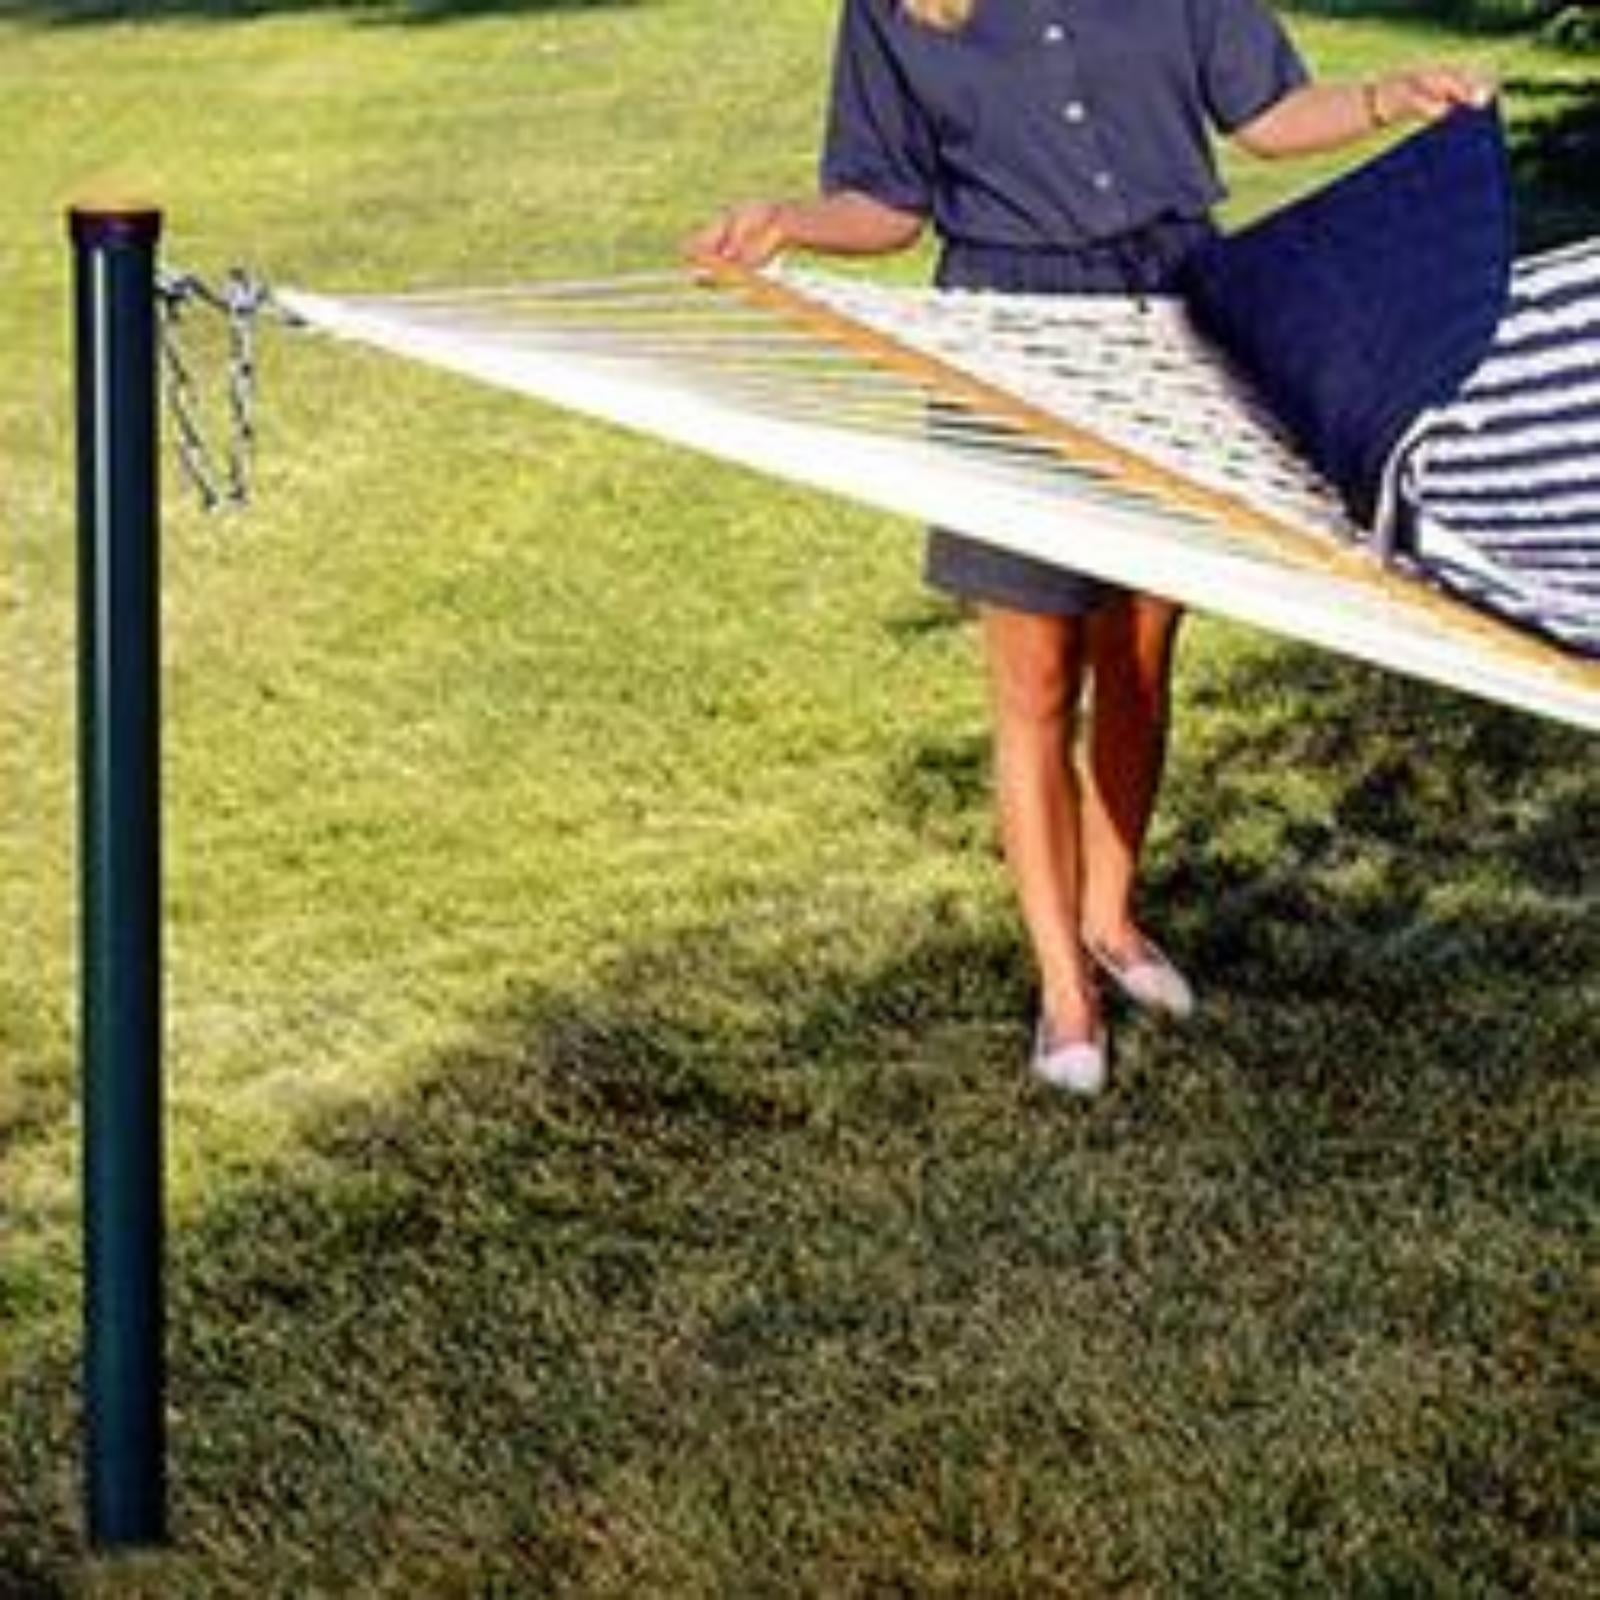 Hammock Removable "In Ground" Post